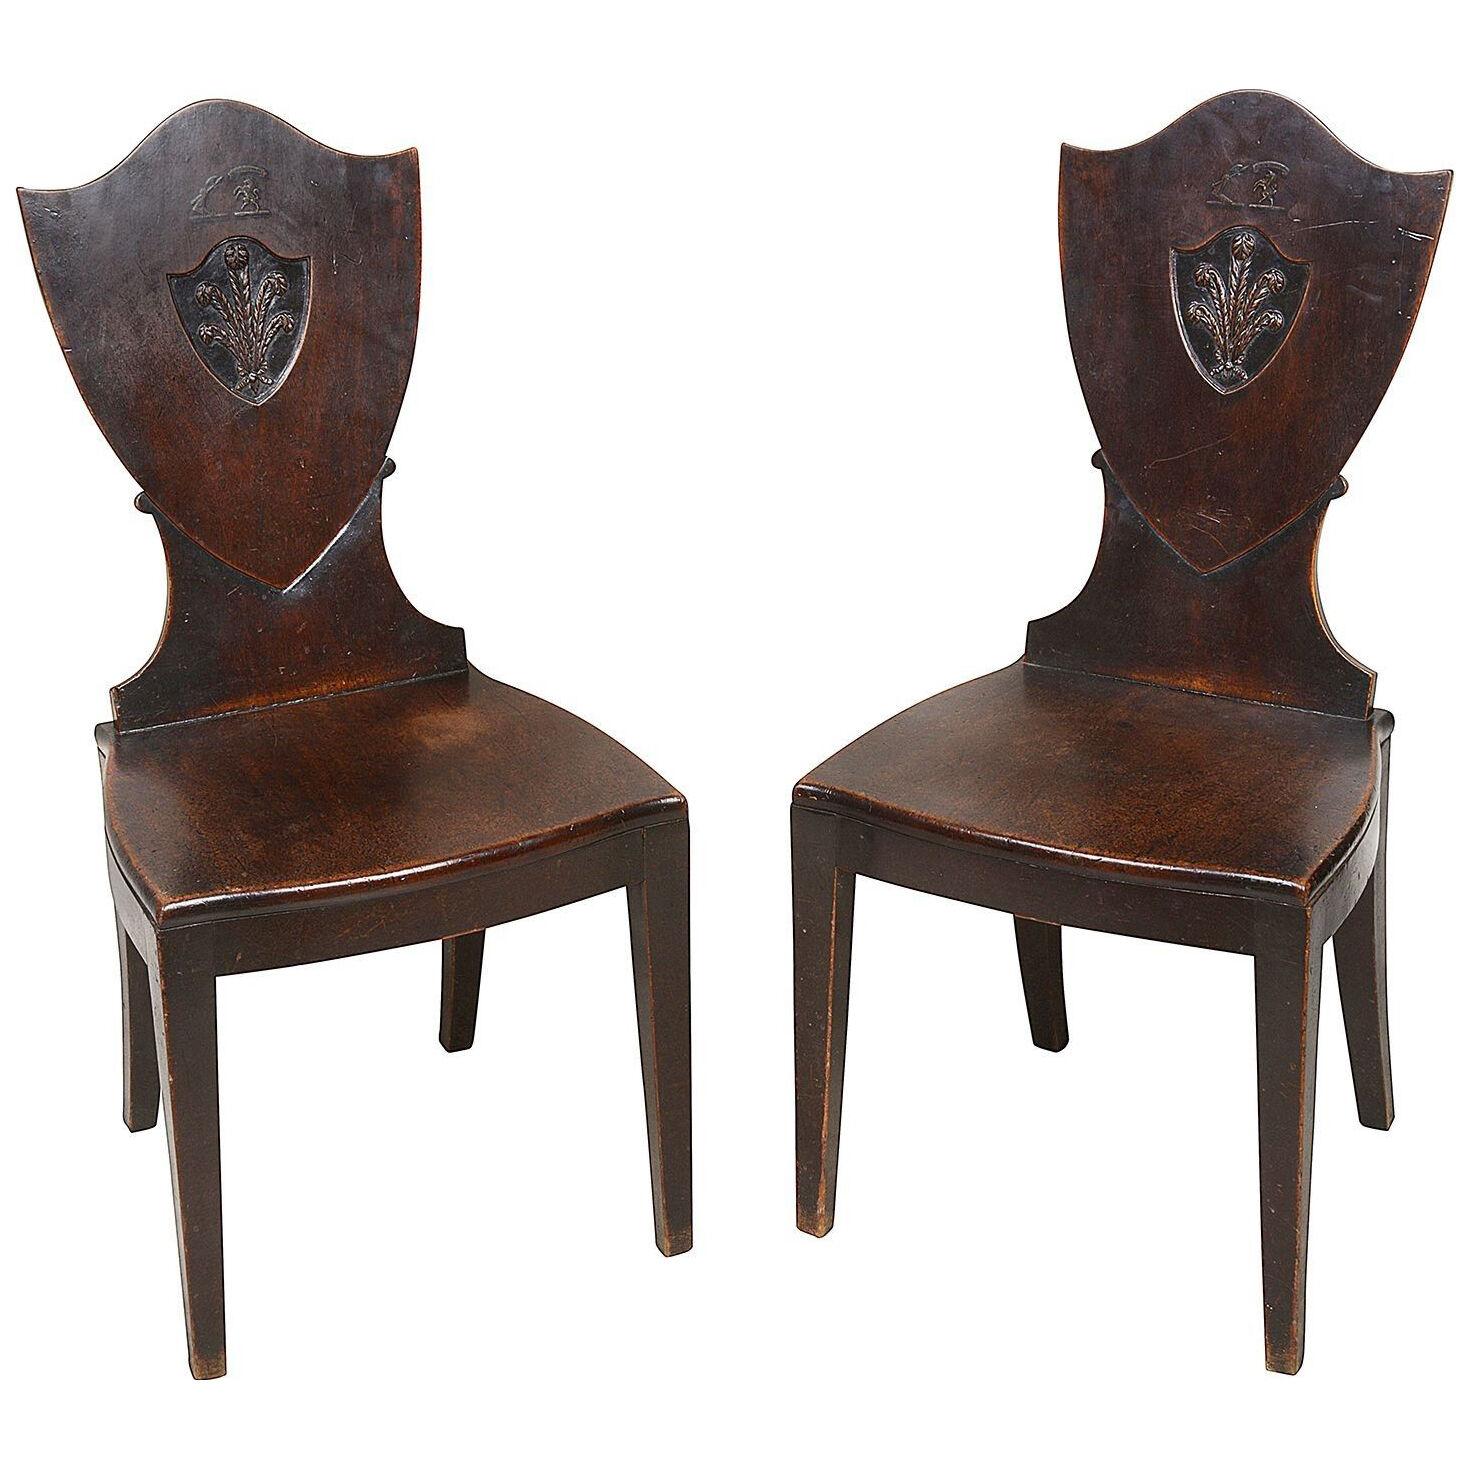 Pair 18th Century Mahogany sheild back Hall chairs with Prince of Wales feathers